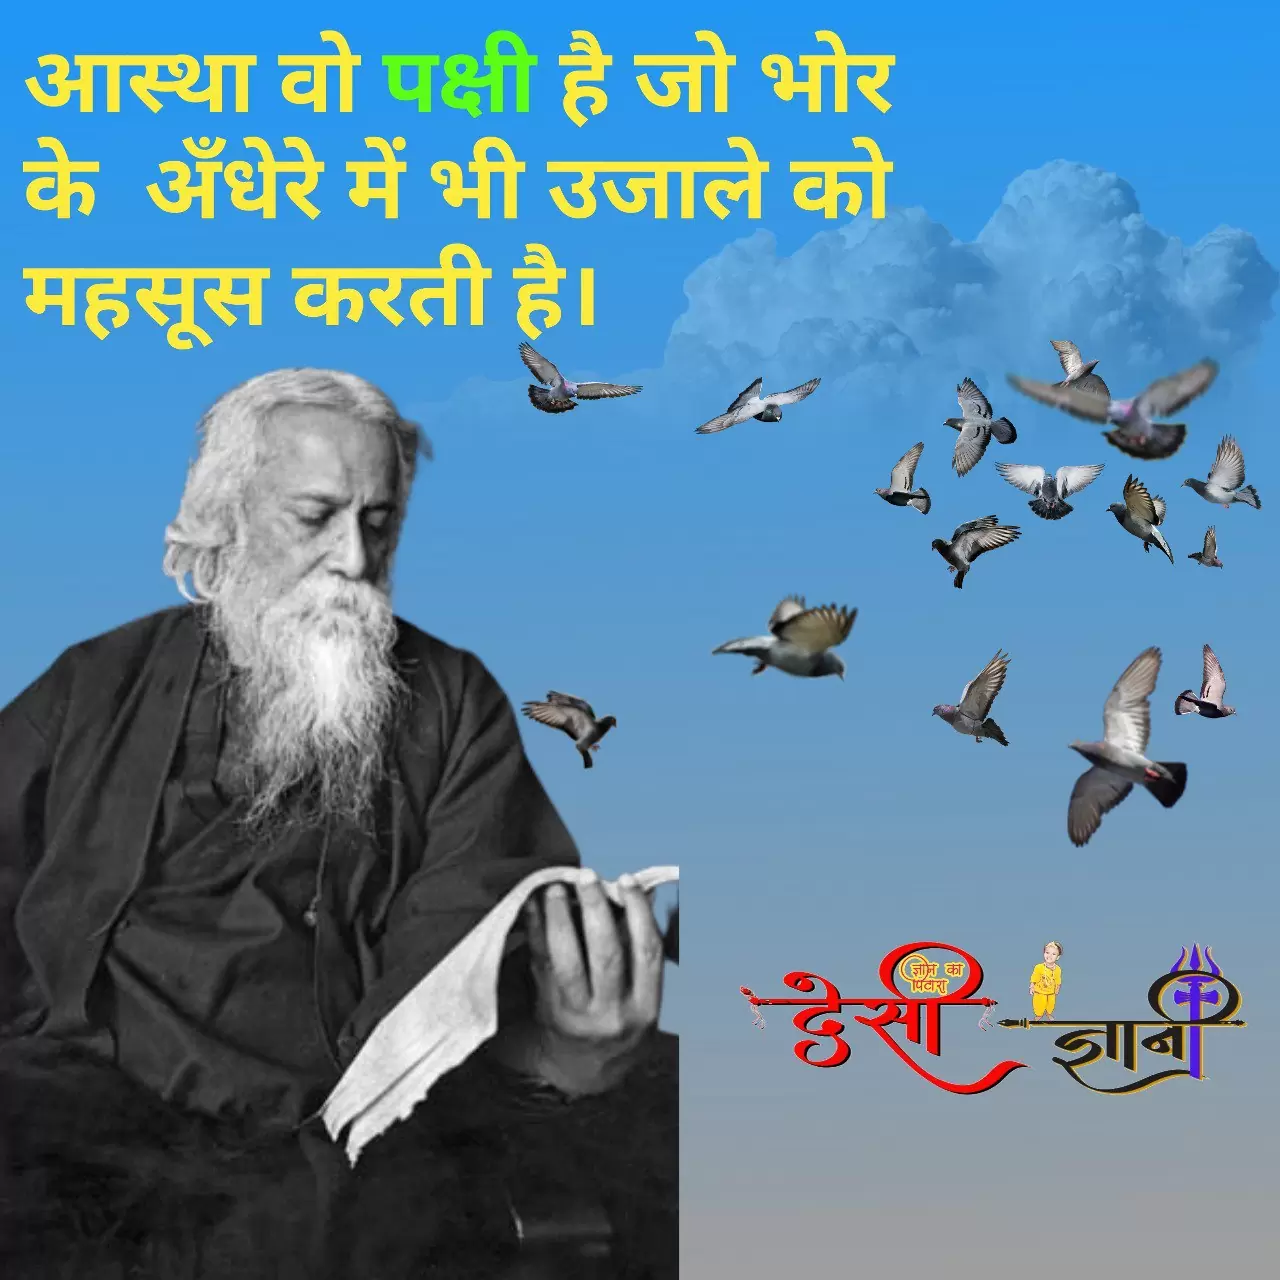 रबीन्द्रनाथ टैगोर की जीवनी और उनके अनमोल विचार | Biography Of Rabindranath Tagore And His Best 25+ Priceless Thoughts